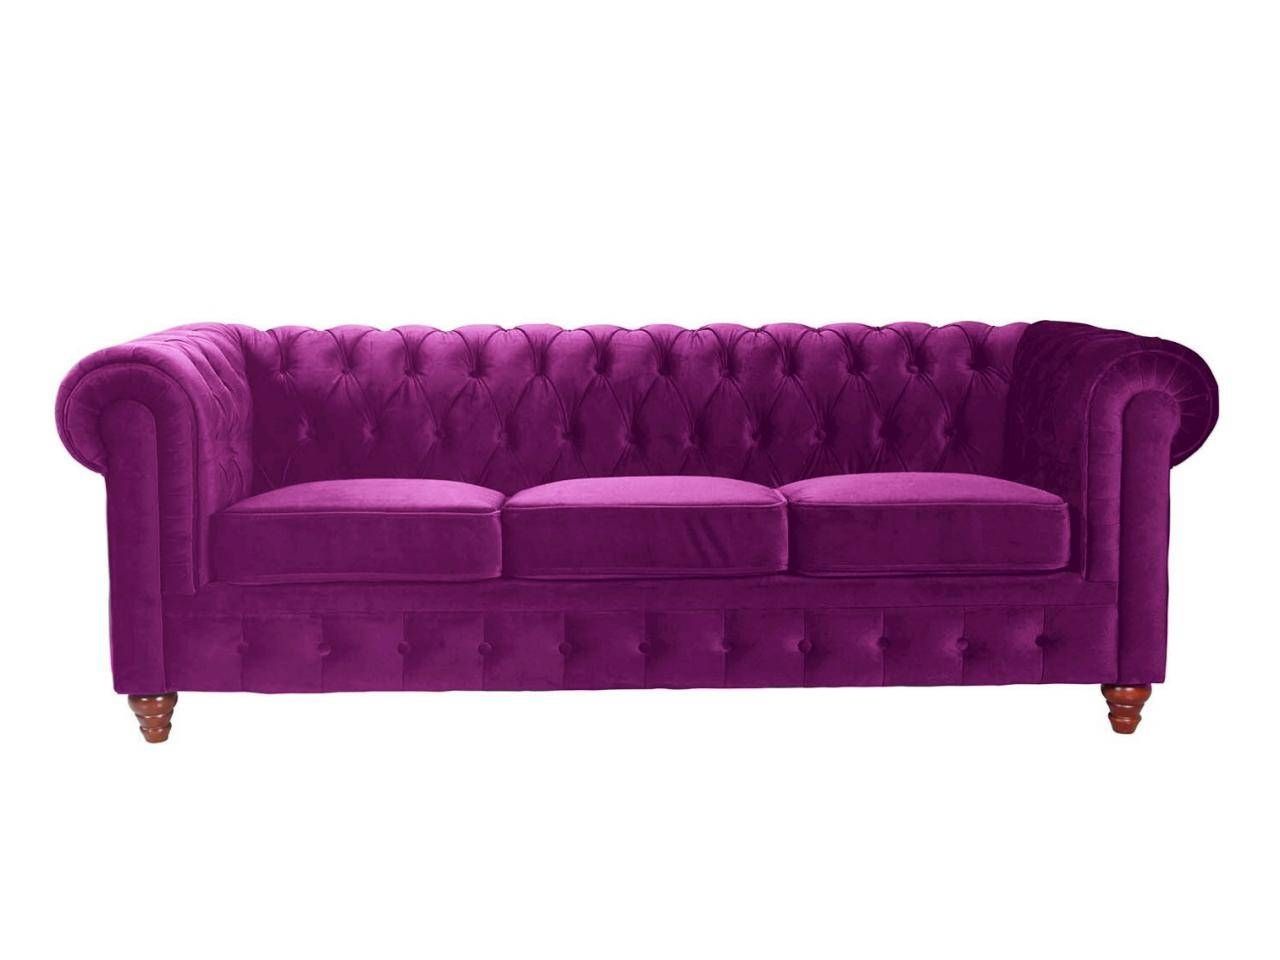 11 Of The Best Velvet Sofas To Decorate With | Hgtv's Decorating For Sofa Trend (Photo 15 of 25)